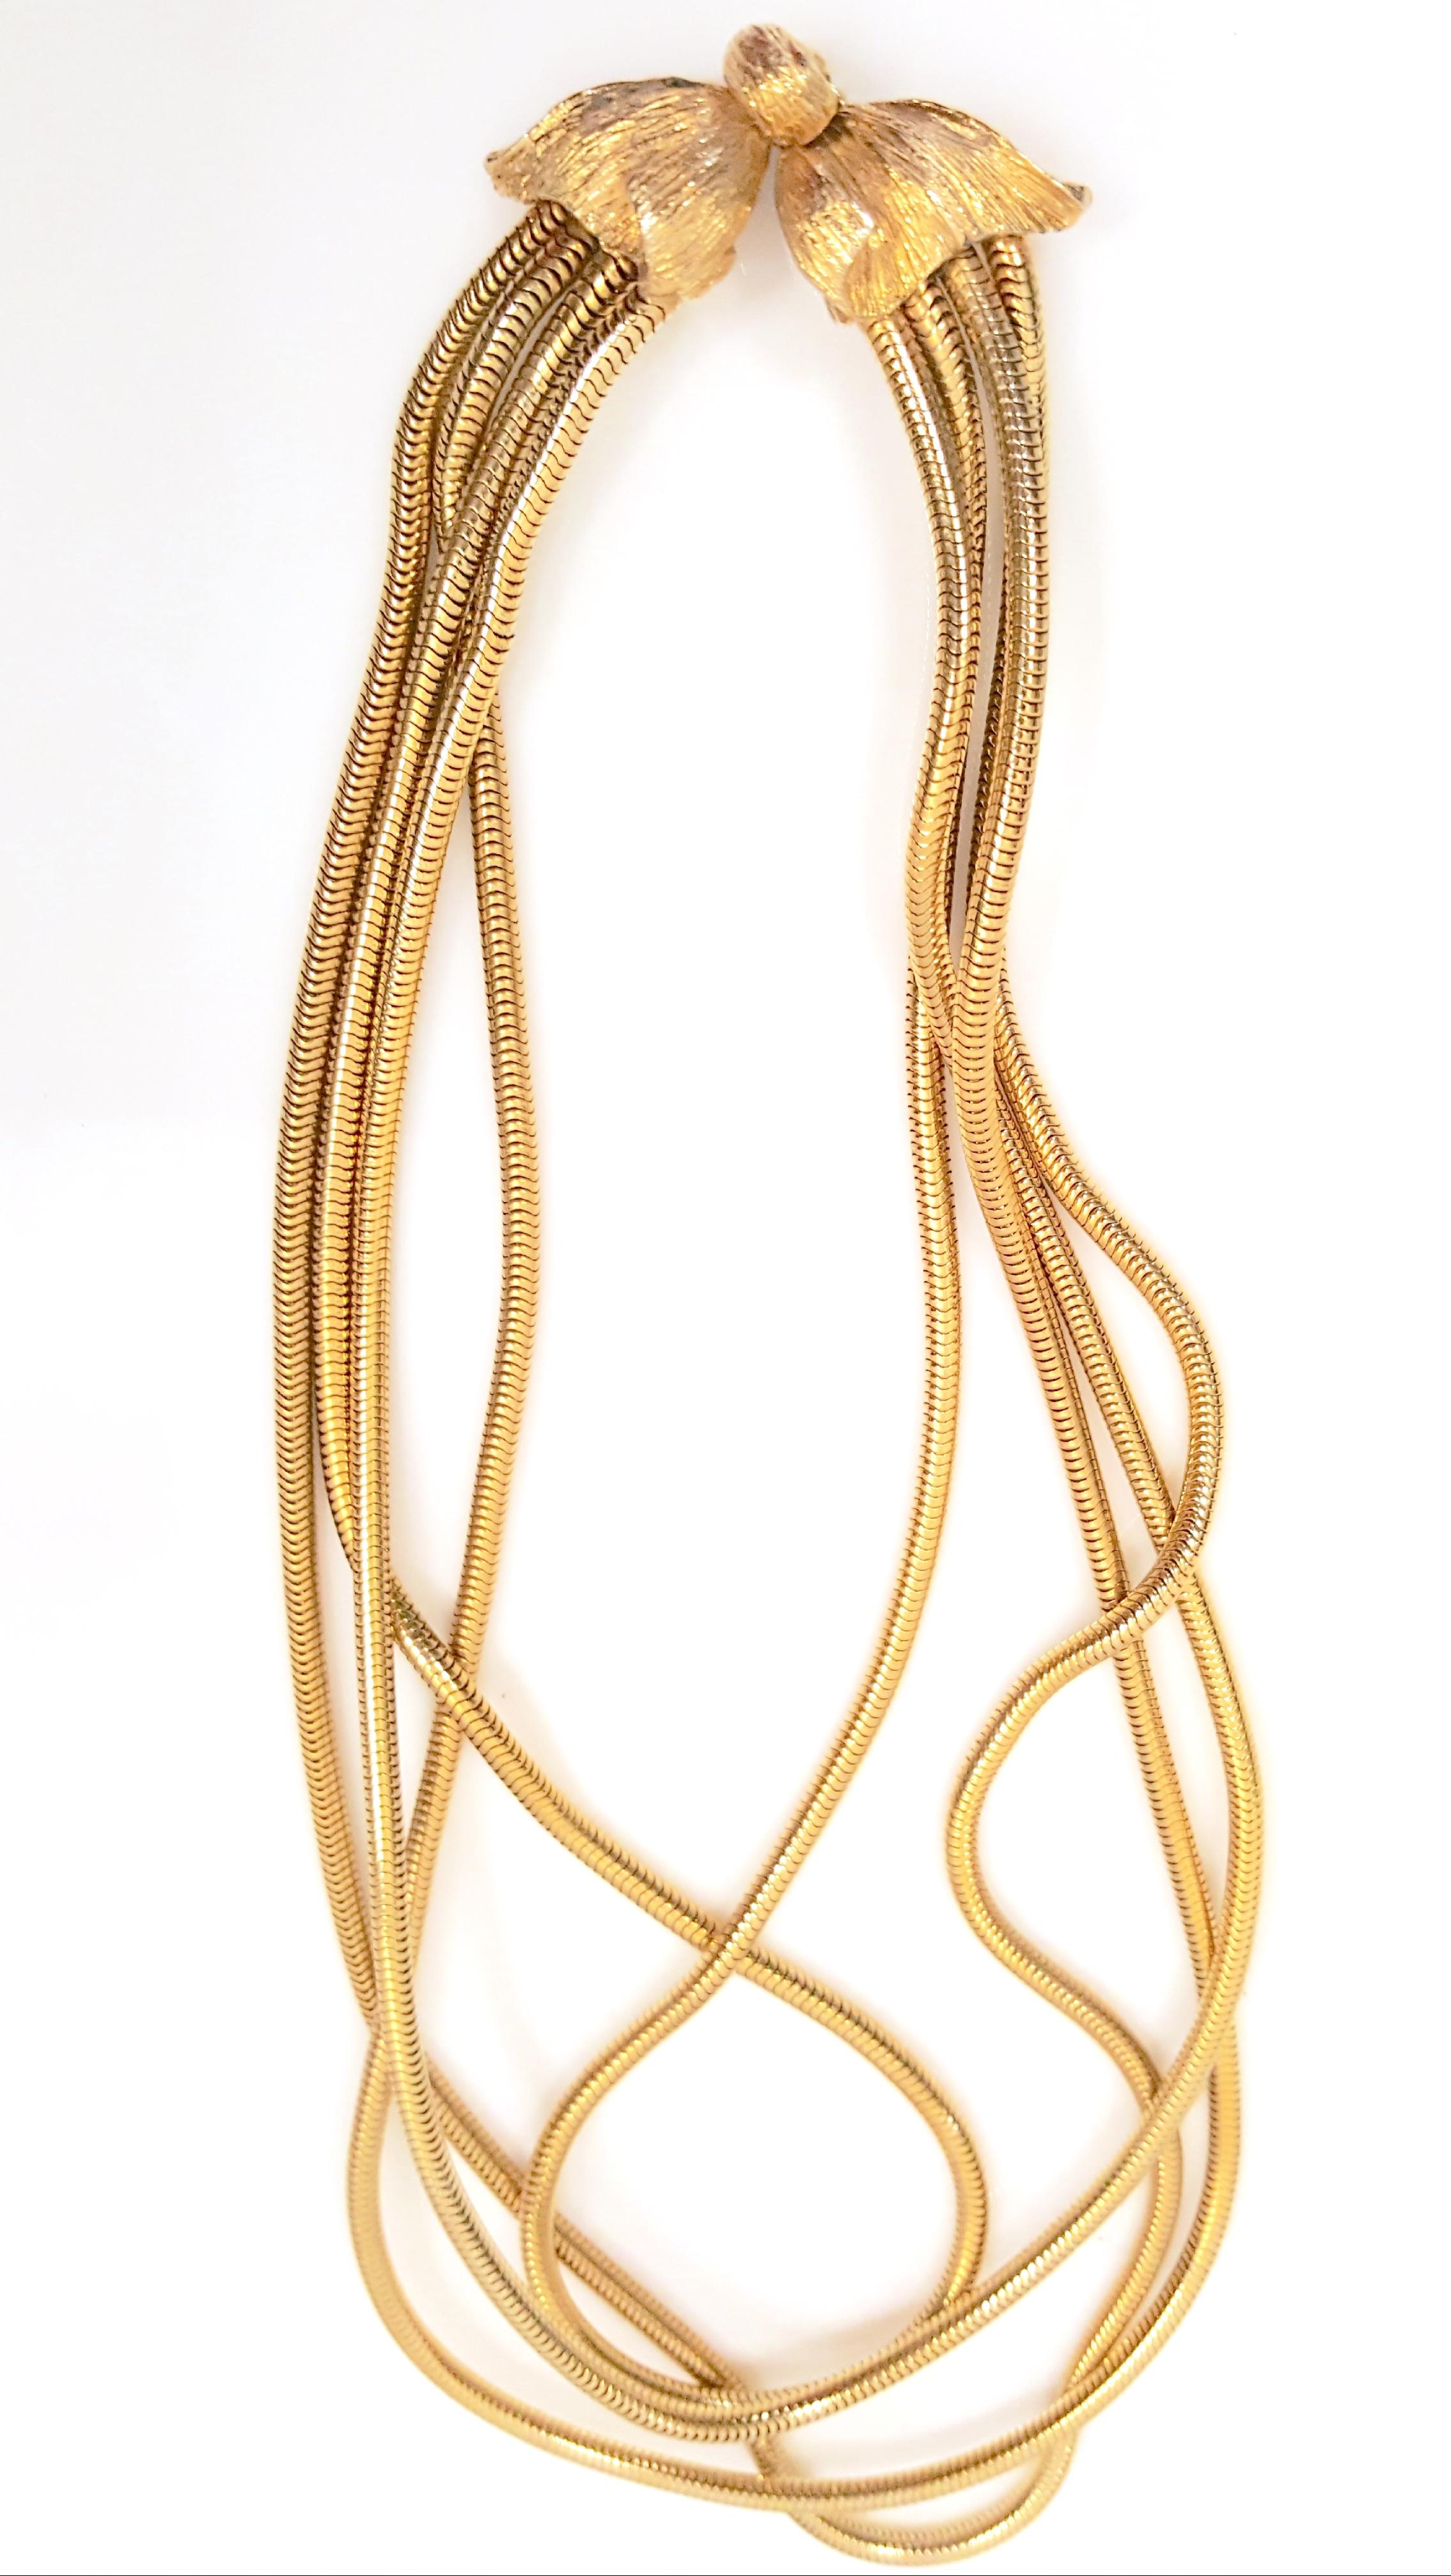 MidCentury SculpturalTexturedGoldBowClasp Graduated4StrandSnakeChain Necklace In Good Condition For Sale In Chicago, IL